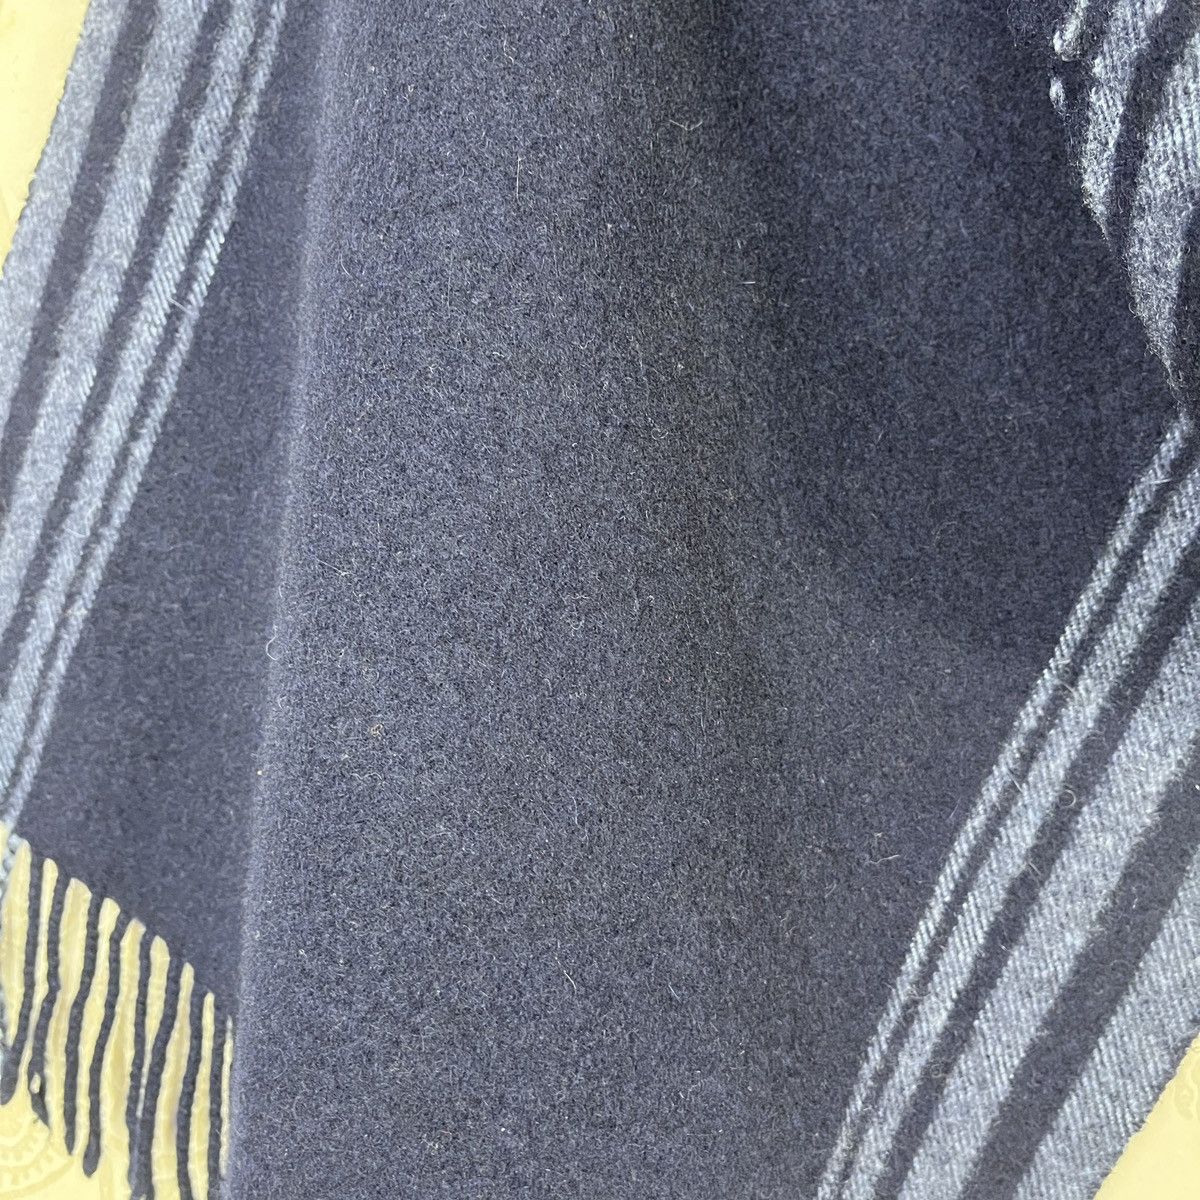 Vintage Alfred Dunhill Wool Scarves With Minor Ripped - 4